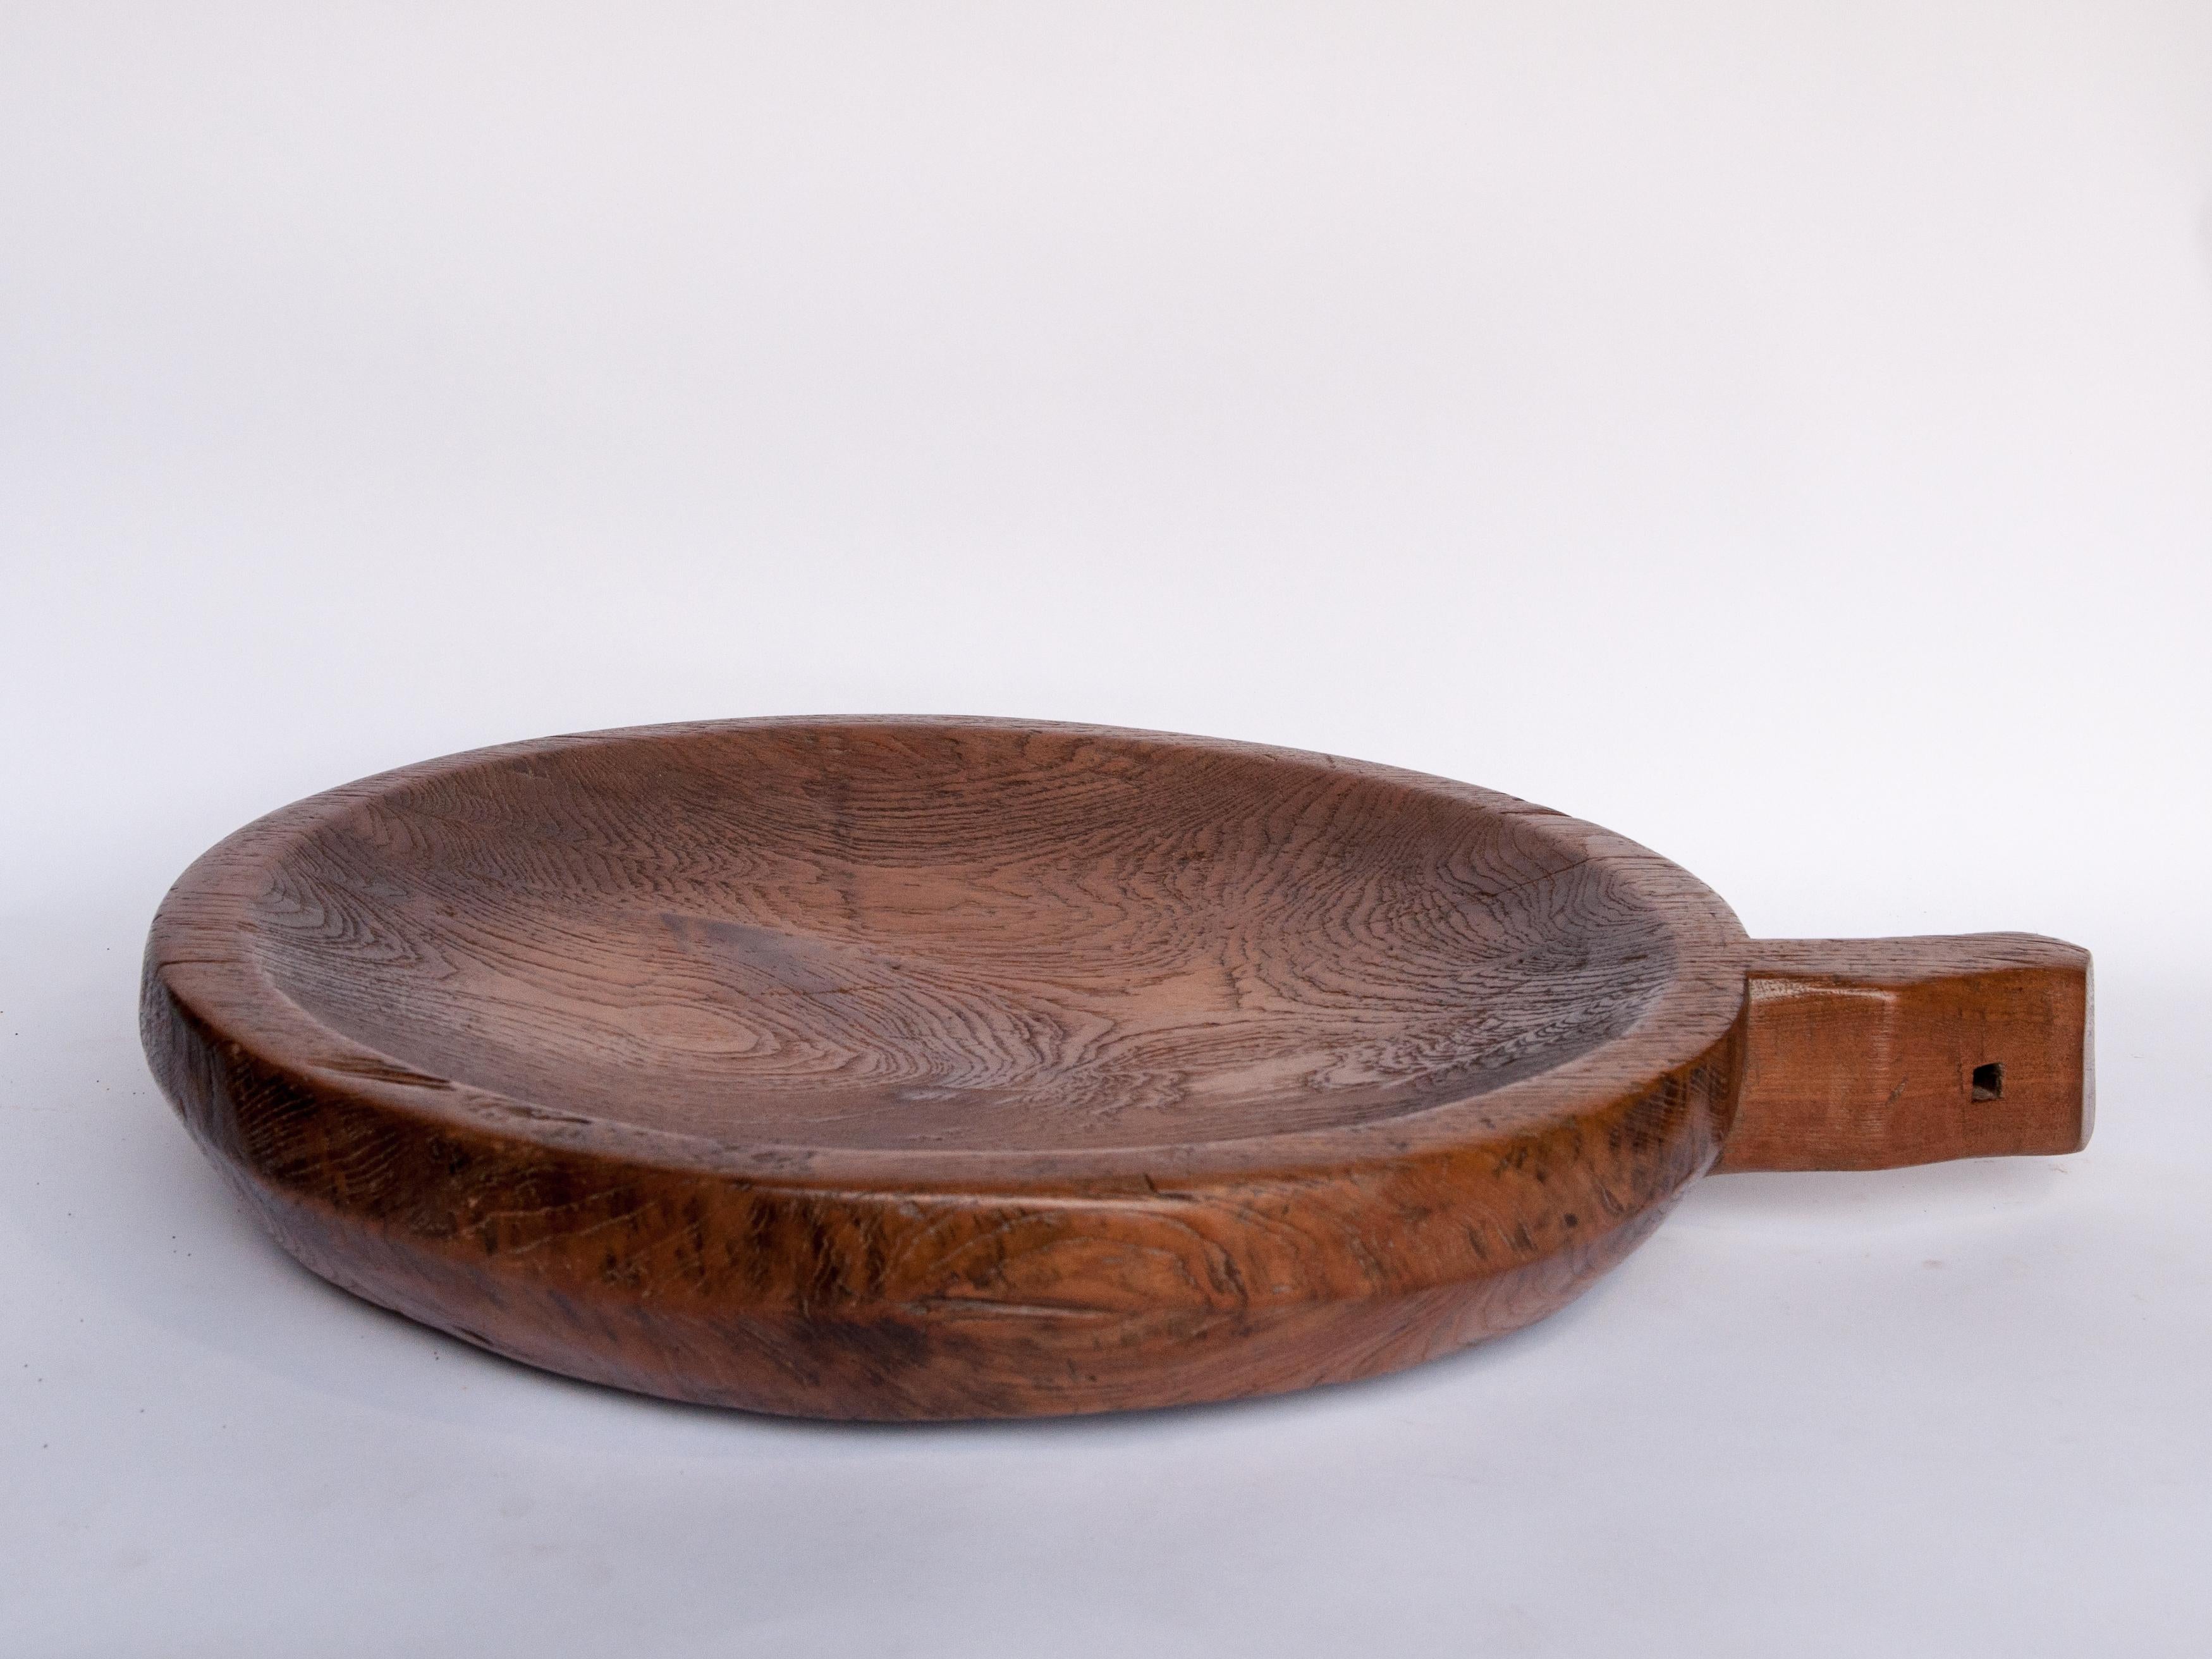 Hand-Crafted Large Vintage Teak Mortar Tray from Northern Thailand, Mid-20th Century